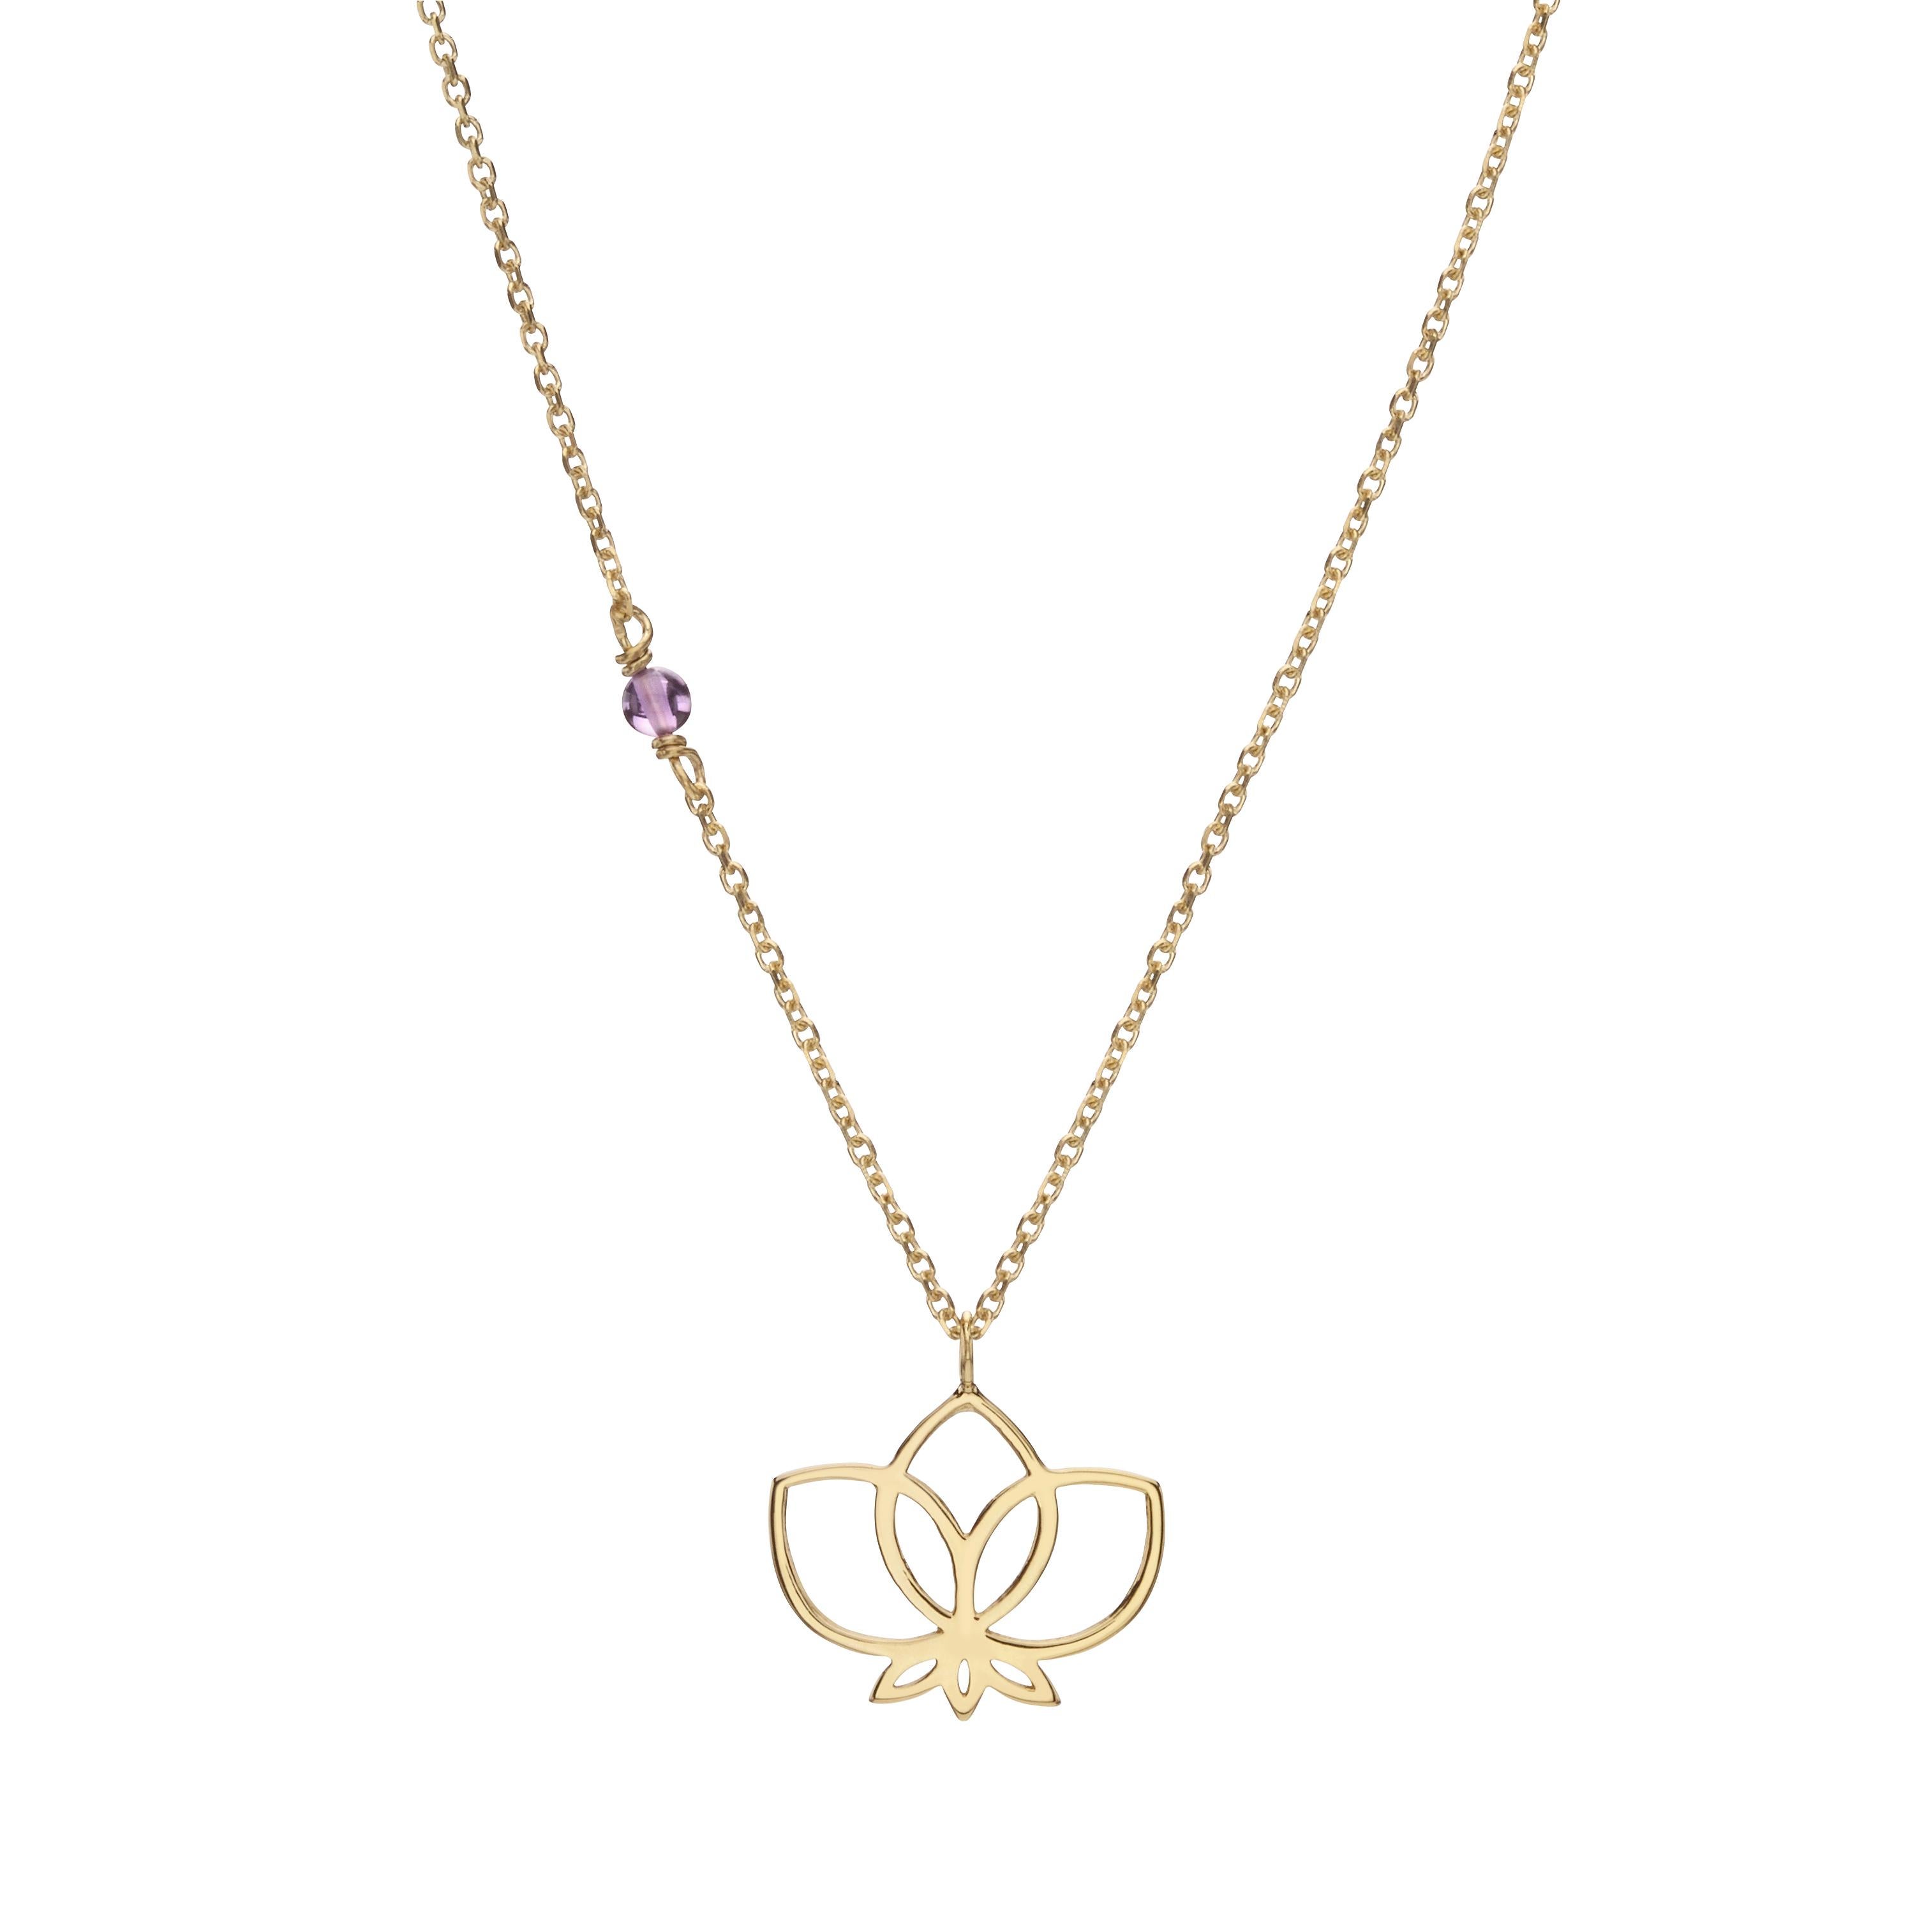 Women's Handcrafted Lotus Pendant Necklace in 14Kt Gold with Round Amethyst For Sale